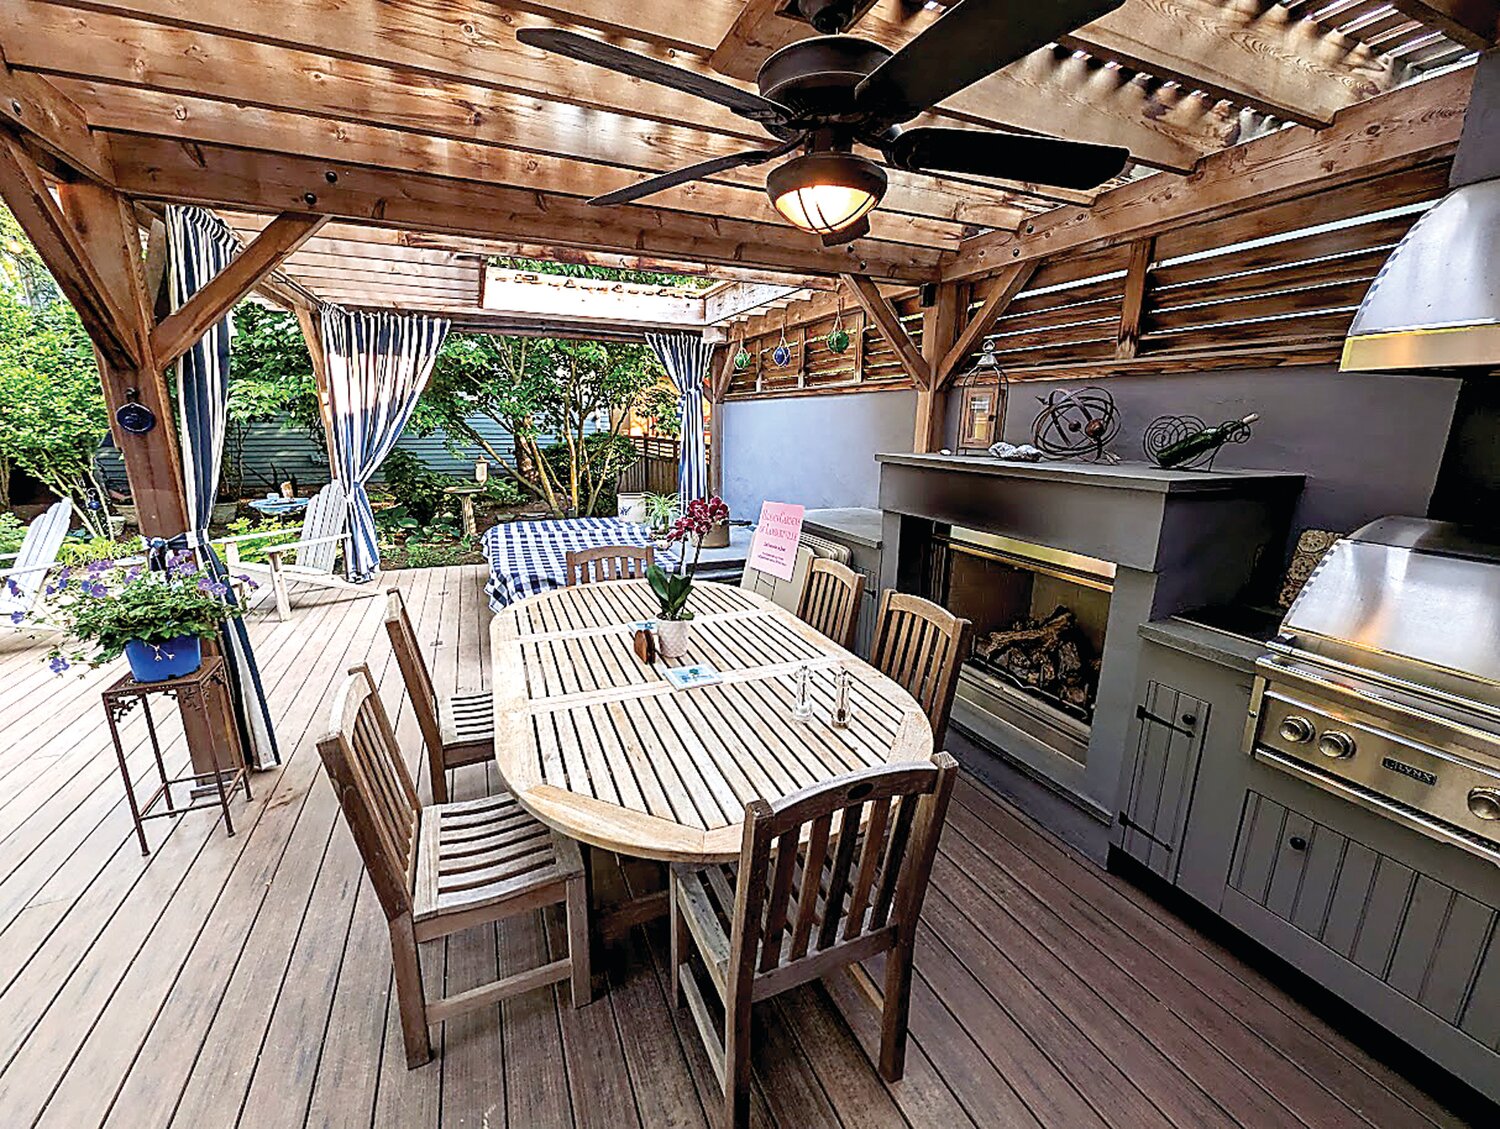 Nancy and Jeff Campbell have created an outdoor kitchen and dining area in their York Street garden.